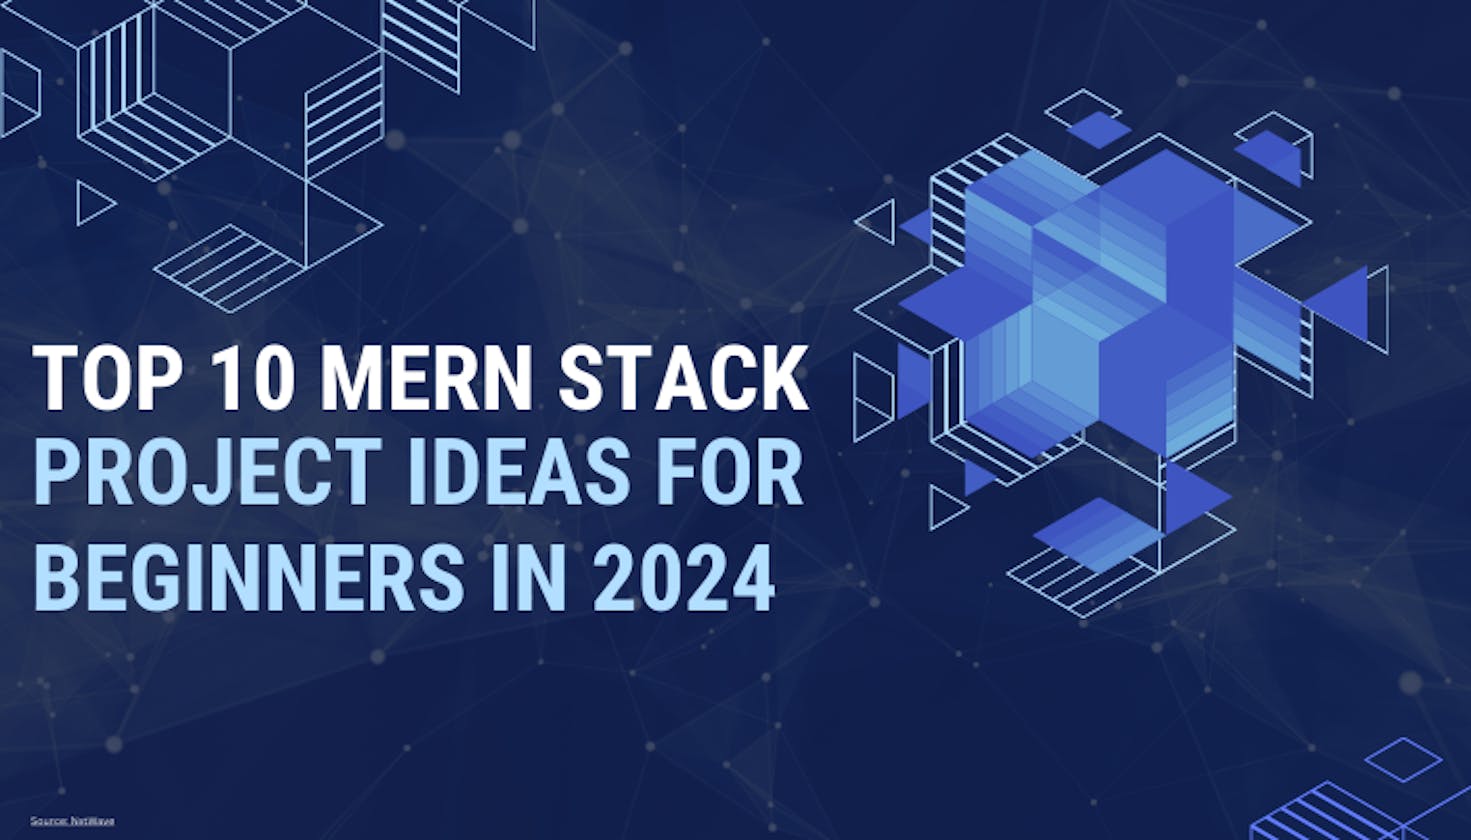 Top 10 MERN Stack Project Ideas For Beginners in 2024